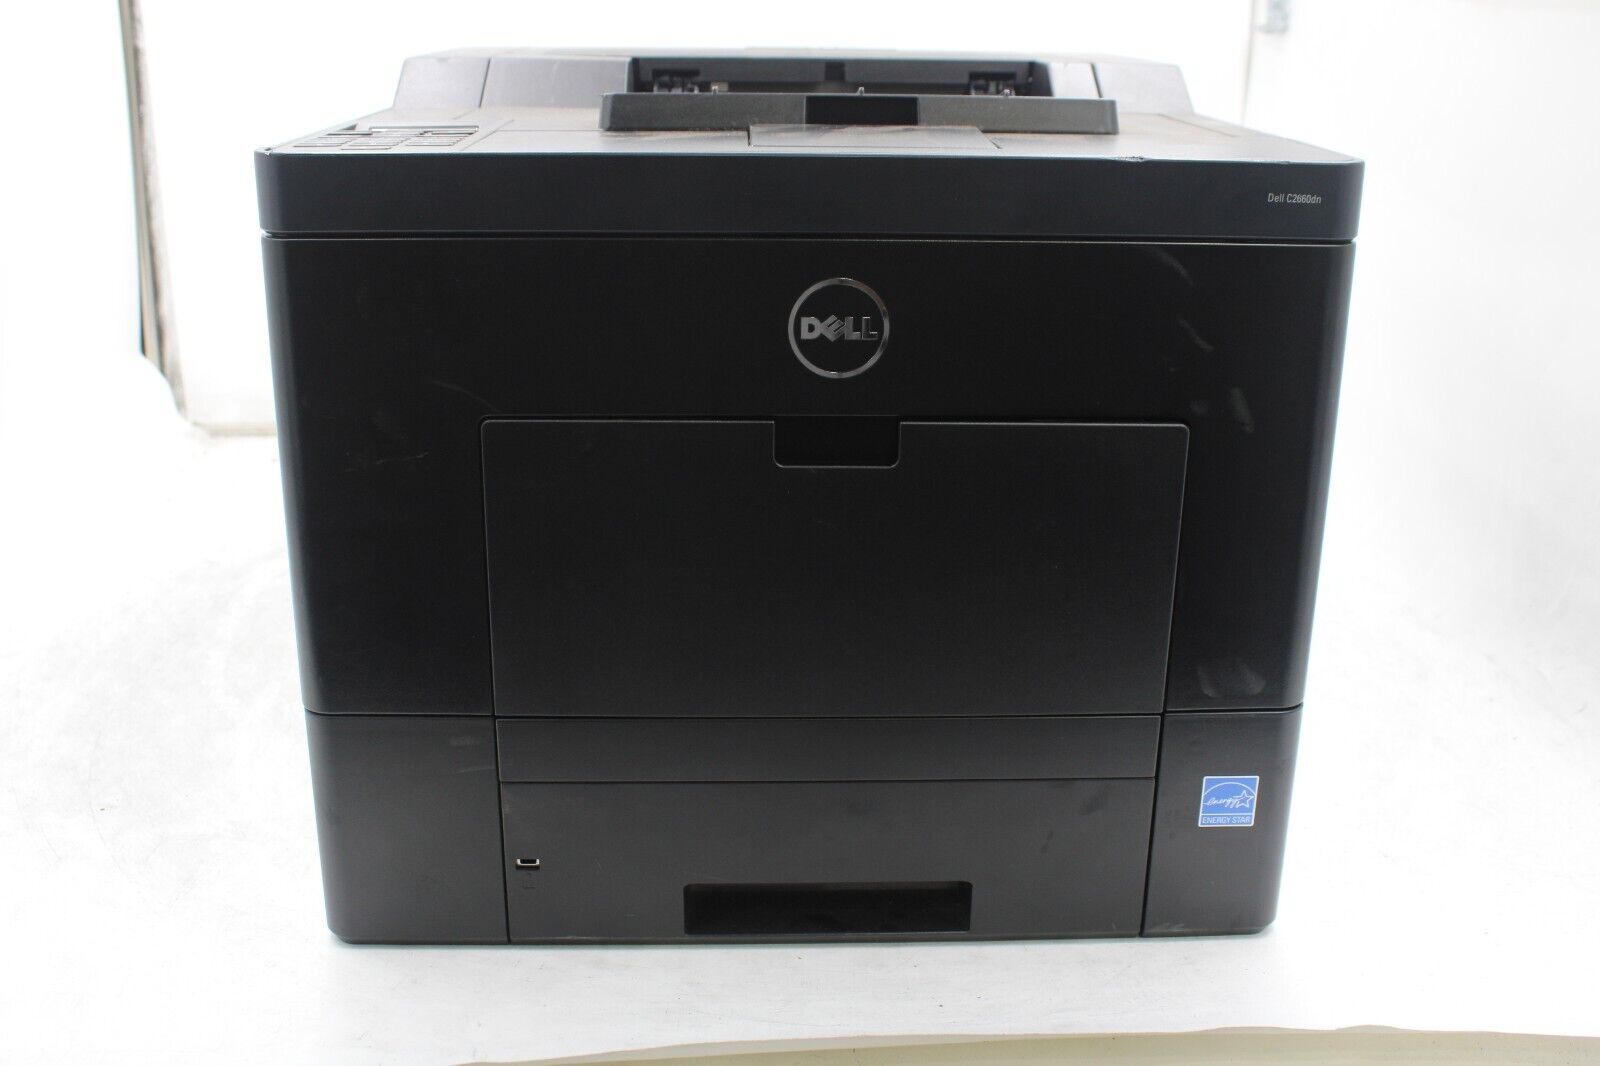 Dell C2660dn Duplex Networkable Workgroup Color Laser Printer With Toner TESTED